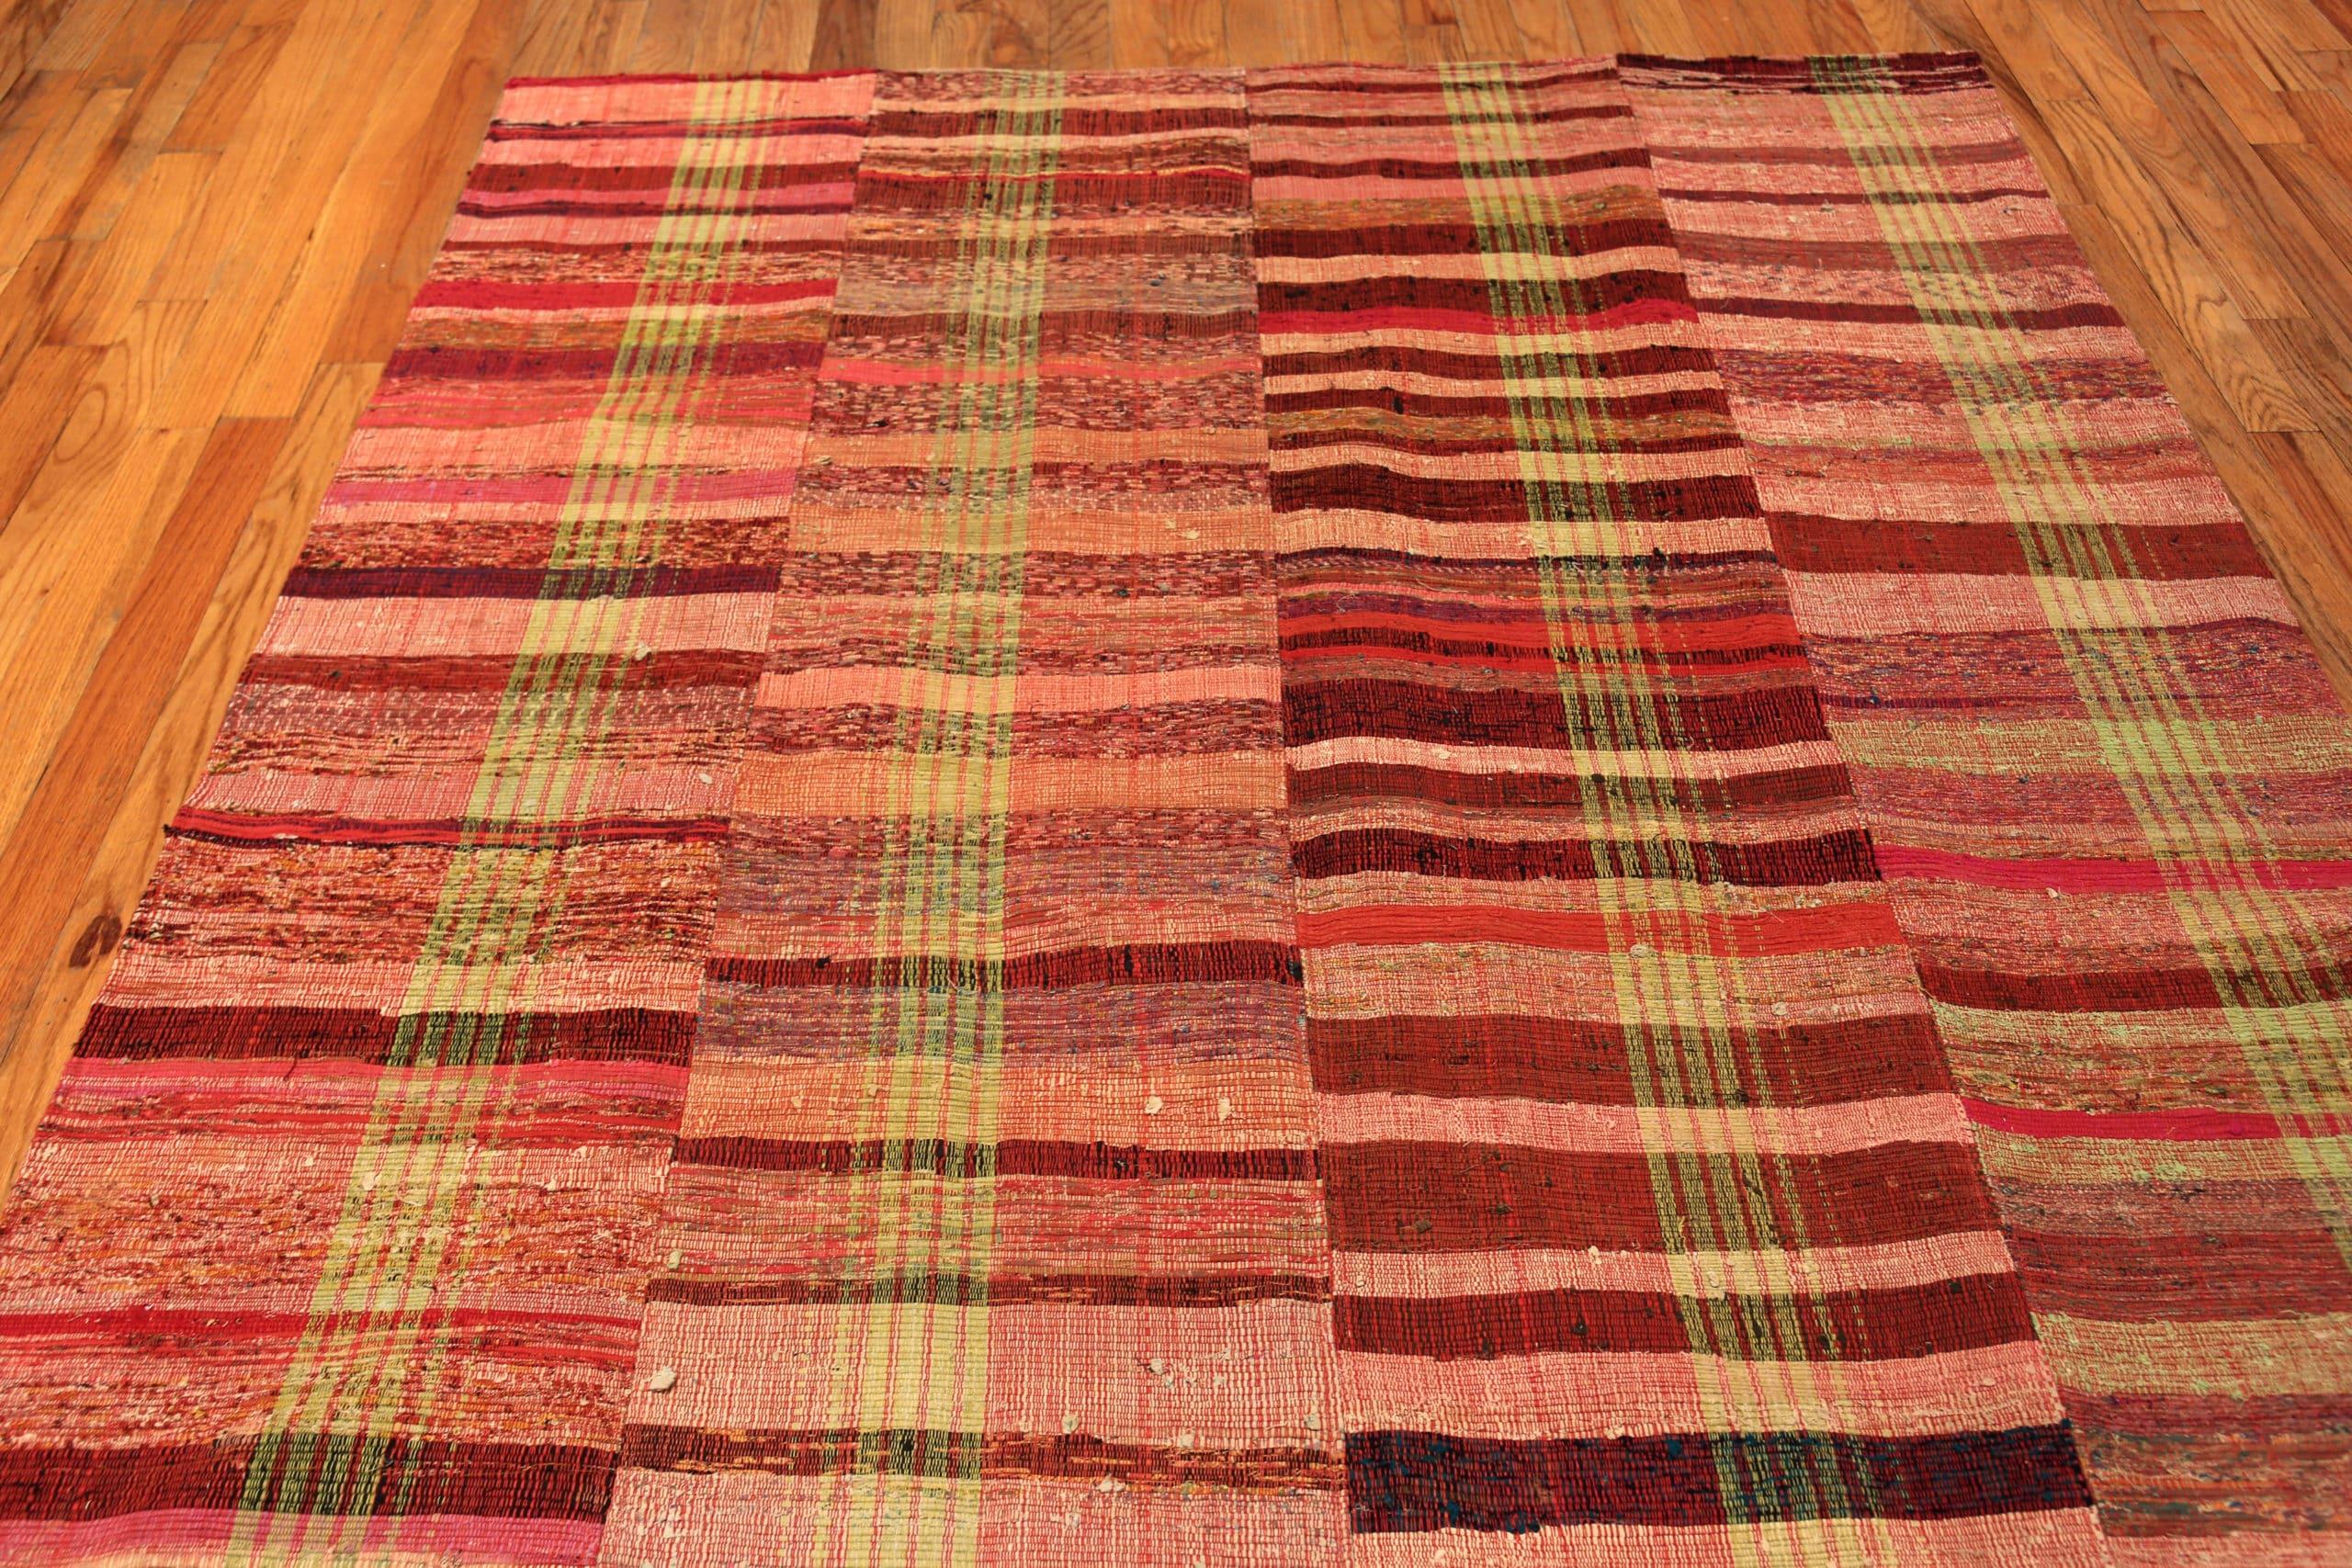 Beautiful Eye-Catching Modern Turkish Rag Rug, Country of Origin: Modern Turkish Rugs, Circa Date: Modern – Shades of red are making news this year in the world of design. Colors of the year include Benjamin Moore’s Raspberry Blush, and Pantone